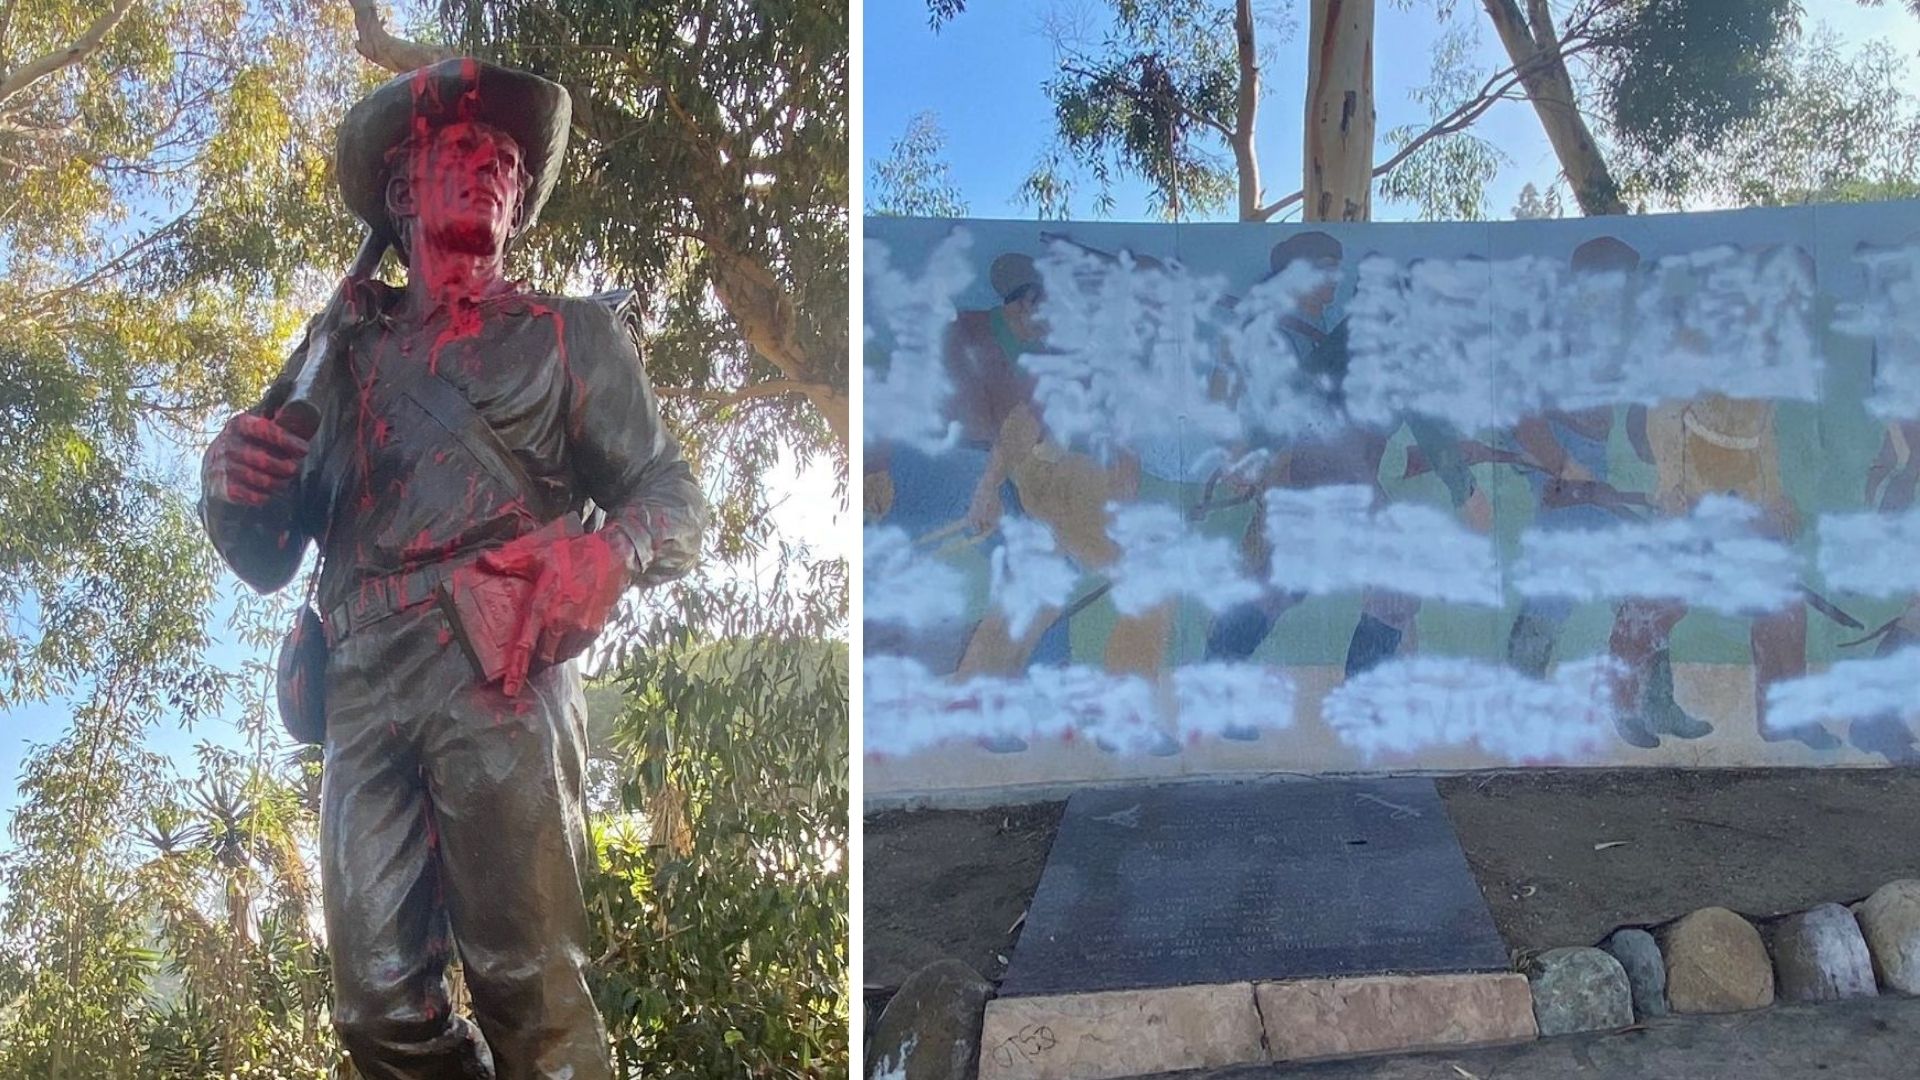 Mormon Battalion Site vandalized with graffiti for the 3rd time